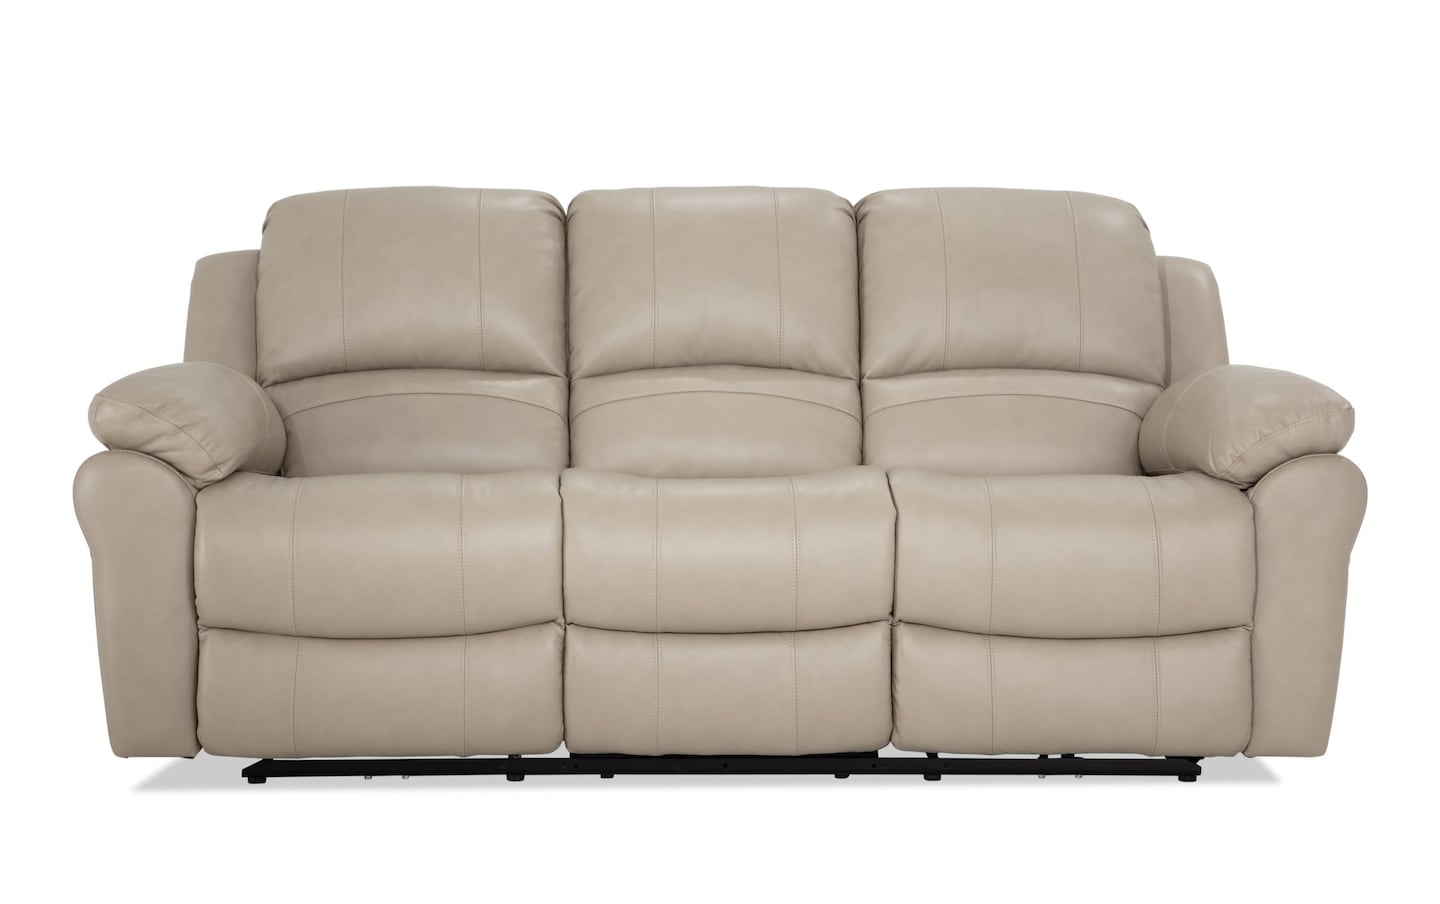 G563 Taupe Grey Upholstery Grade Recycled Leather Bonded Leather